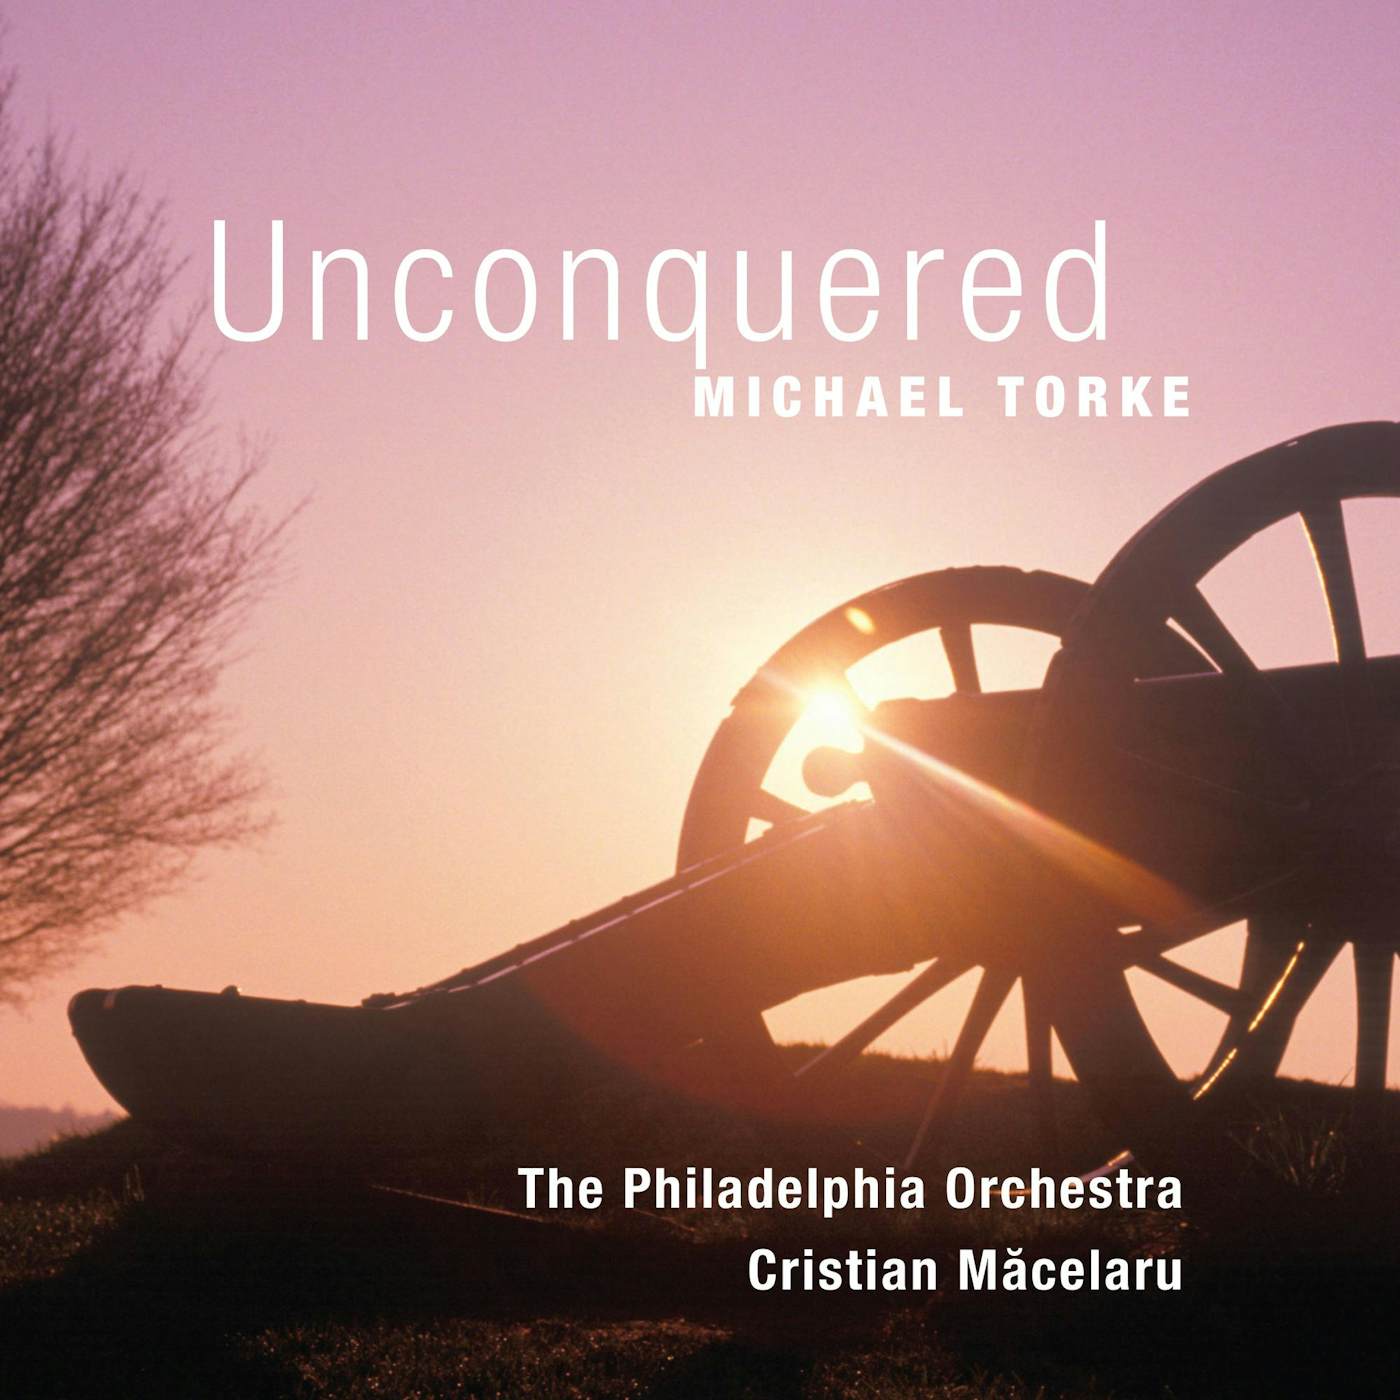 Michael Torke Unconquered CD